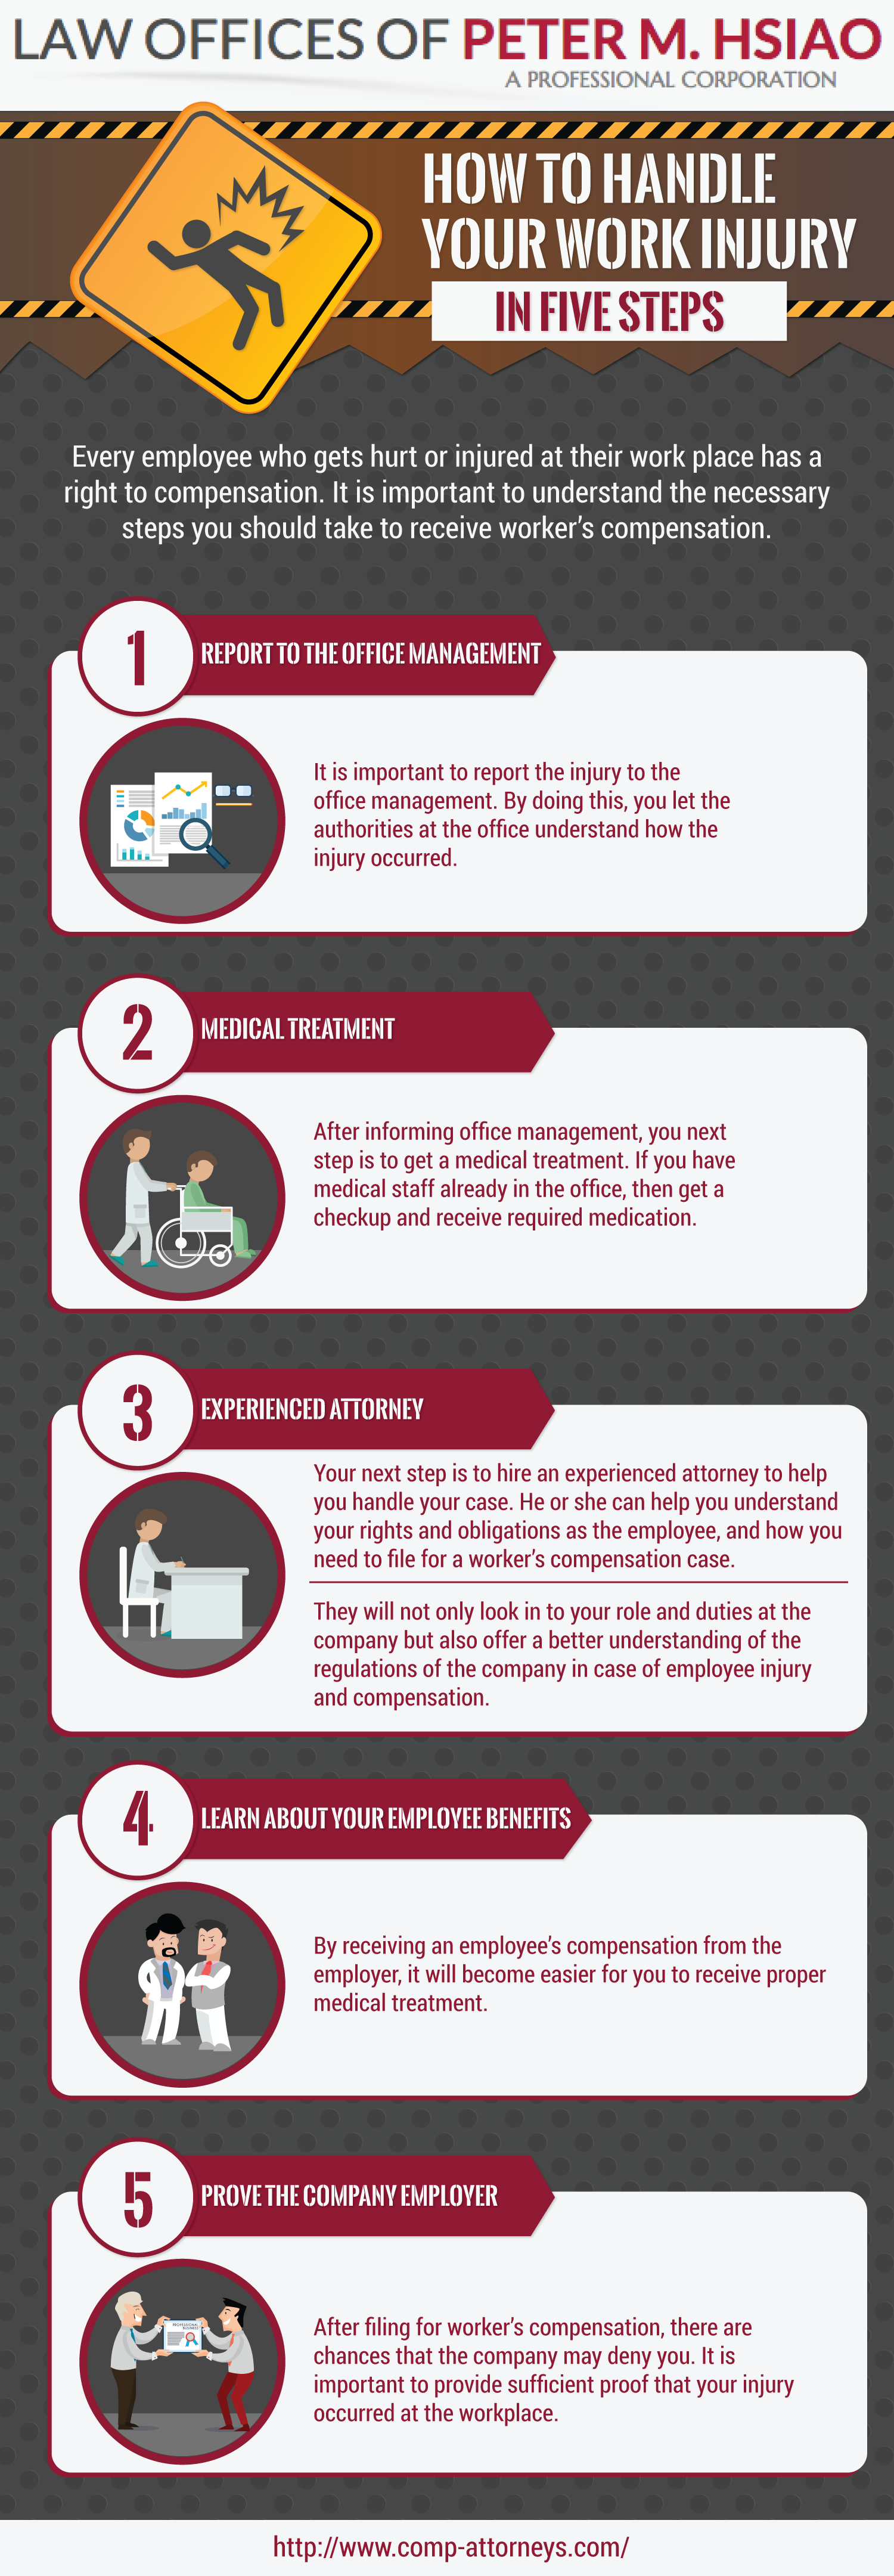 How to handle your work injury in five steps | Visual.ly